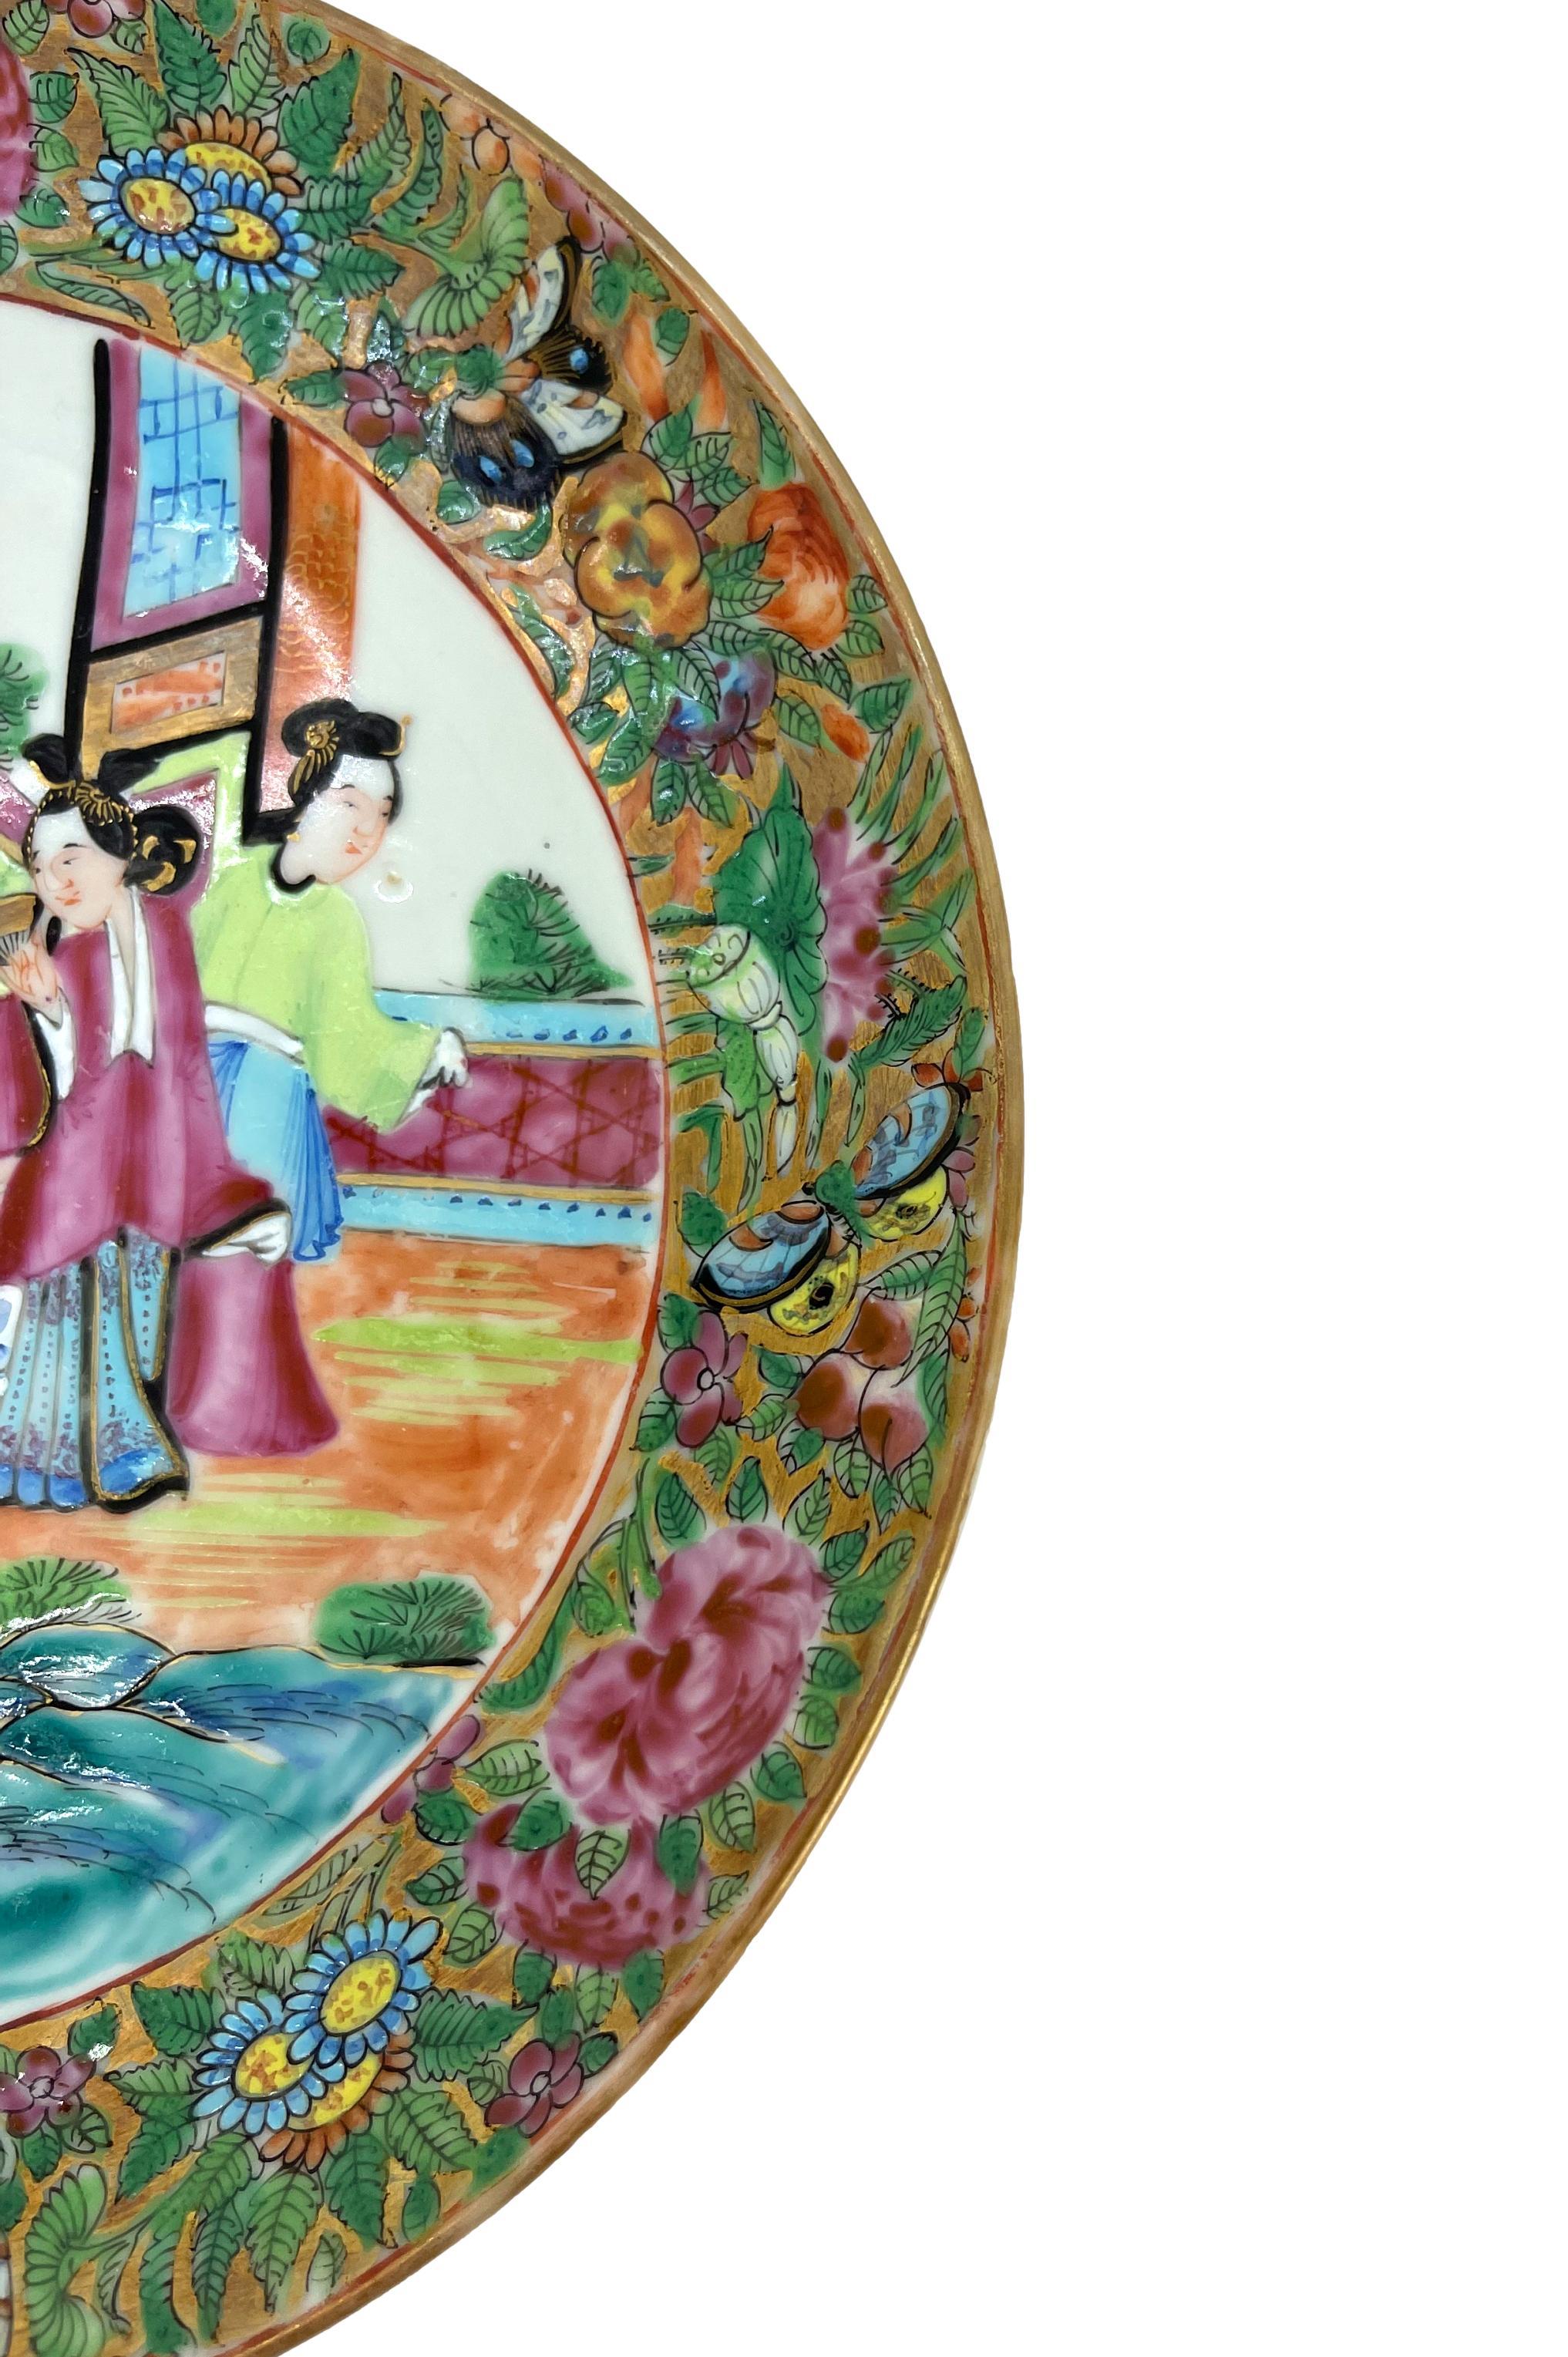 Enameled Chinese Export Porcelain Rose Mandarin Plate, Emperor and Court, ca. 1840